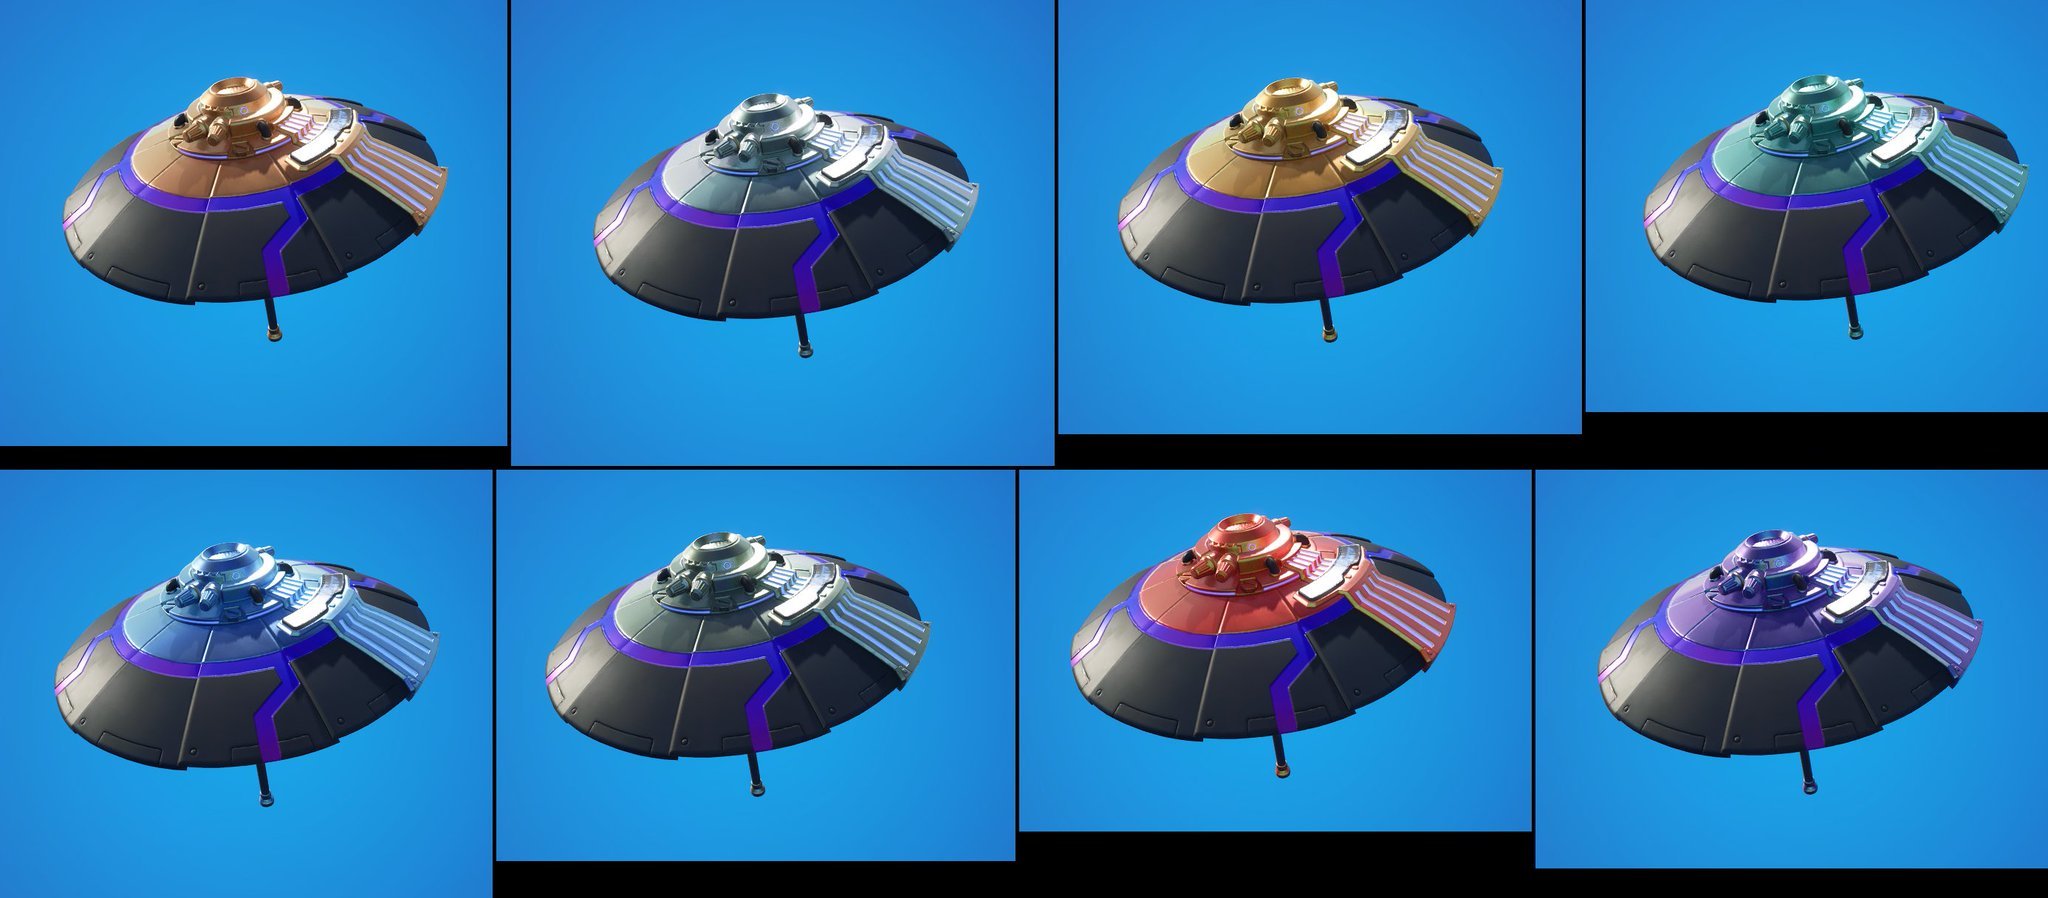 Competitor's Skyblades, Fortnite Wiki